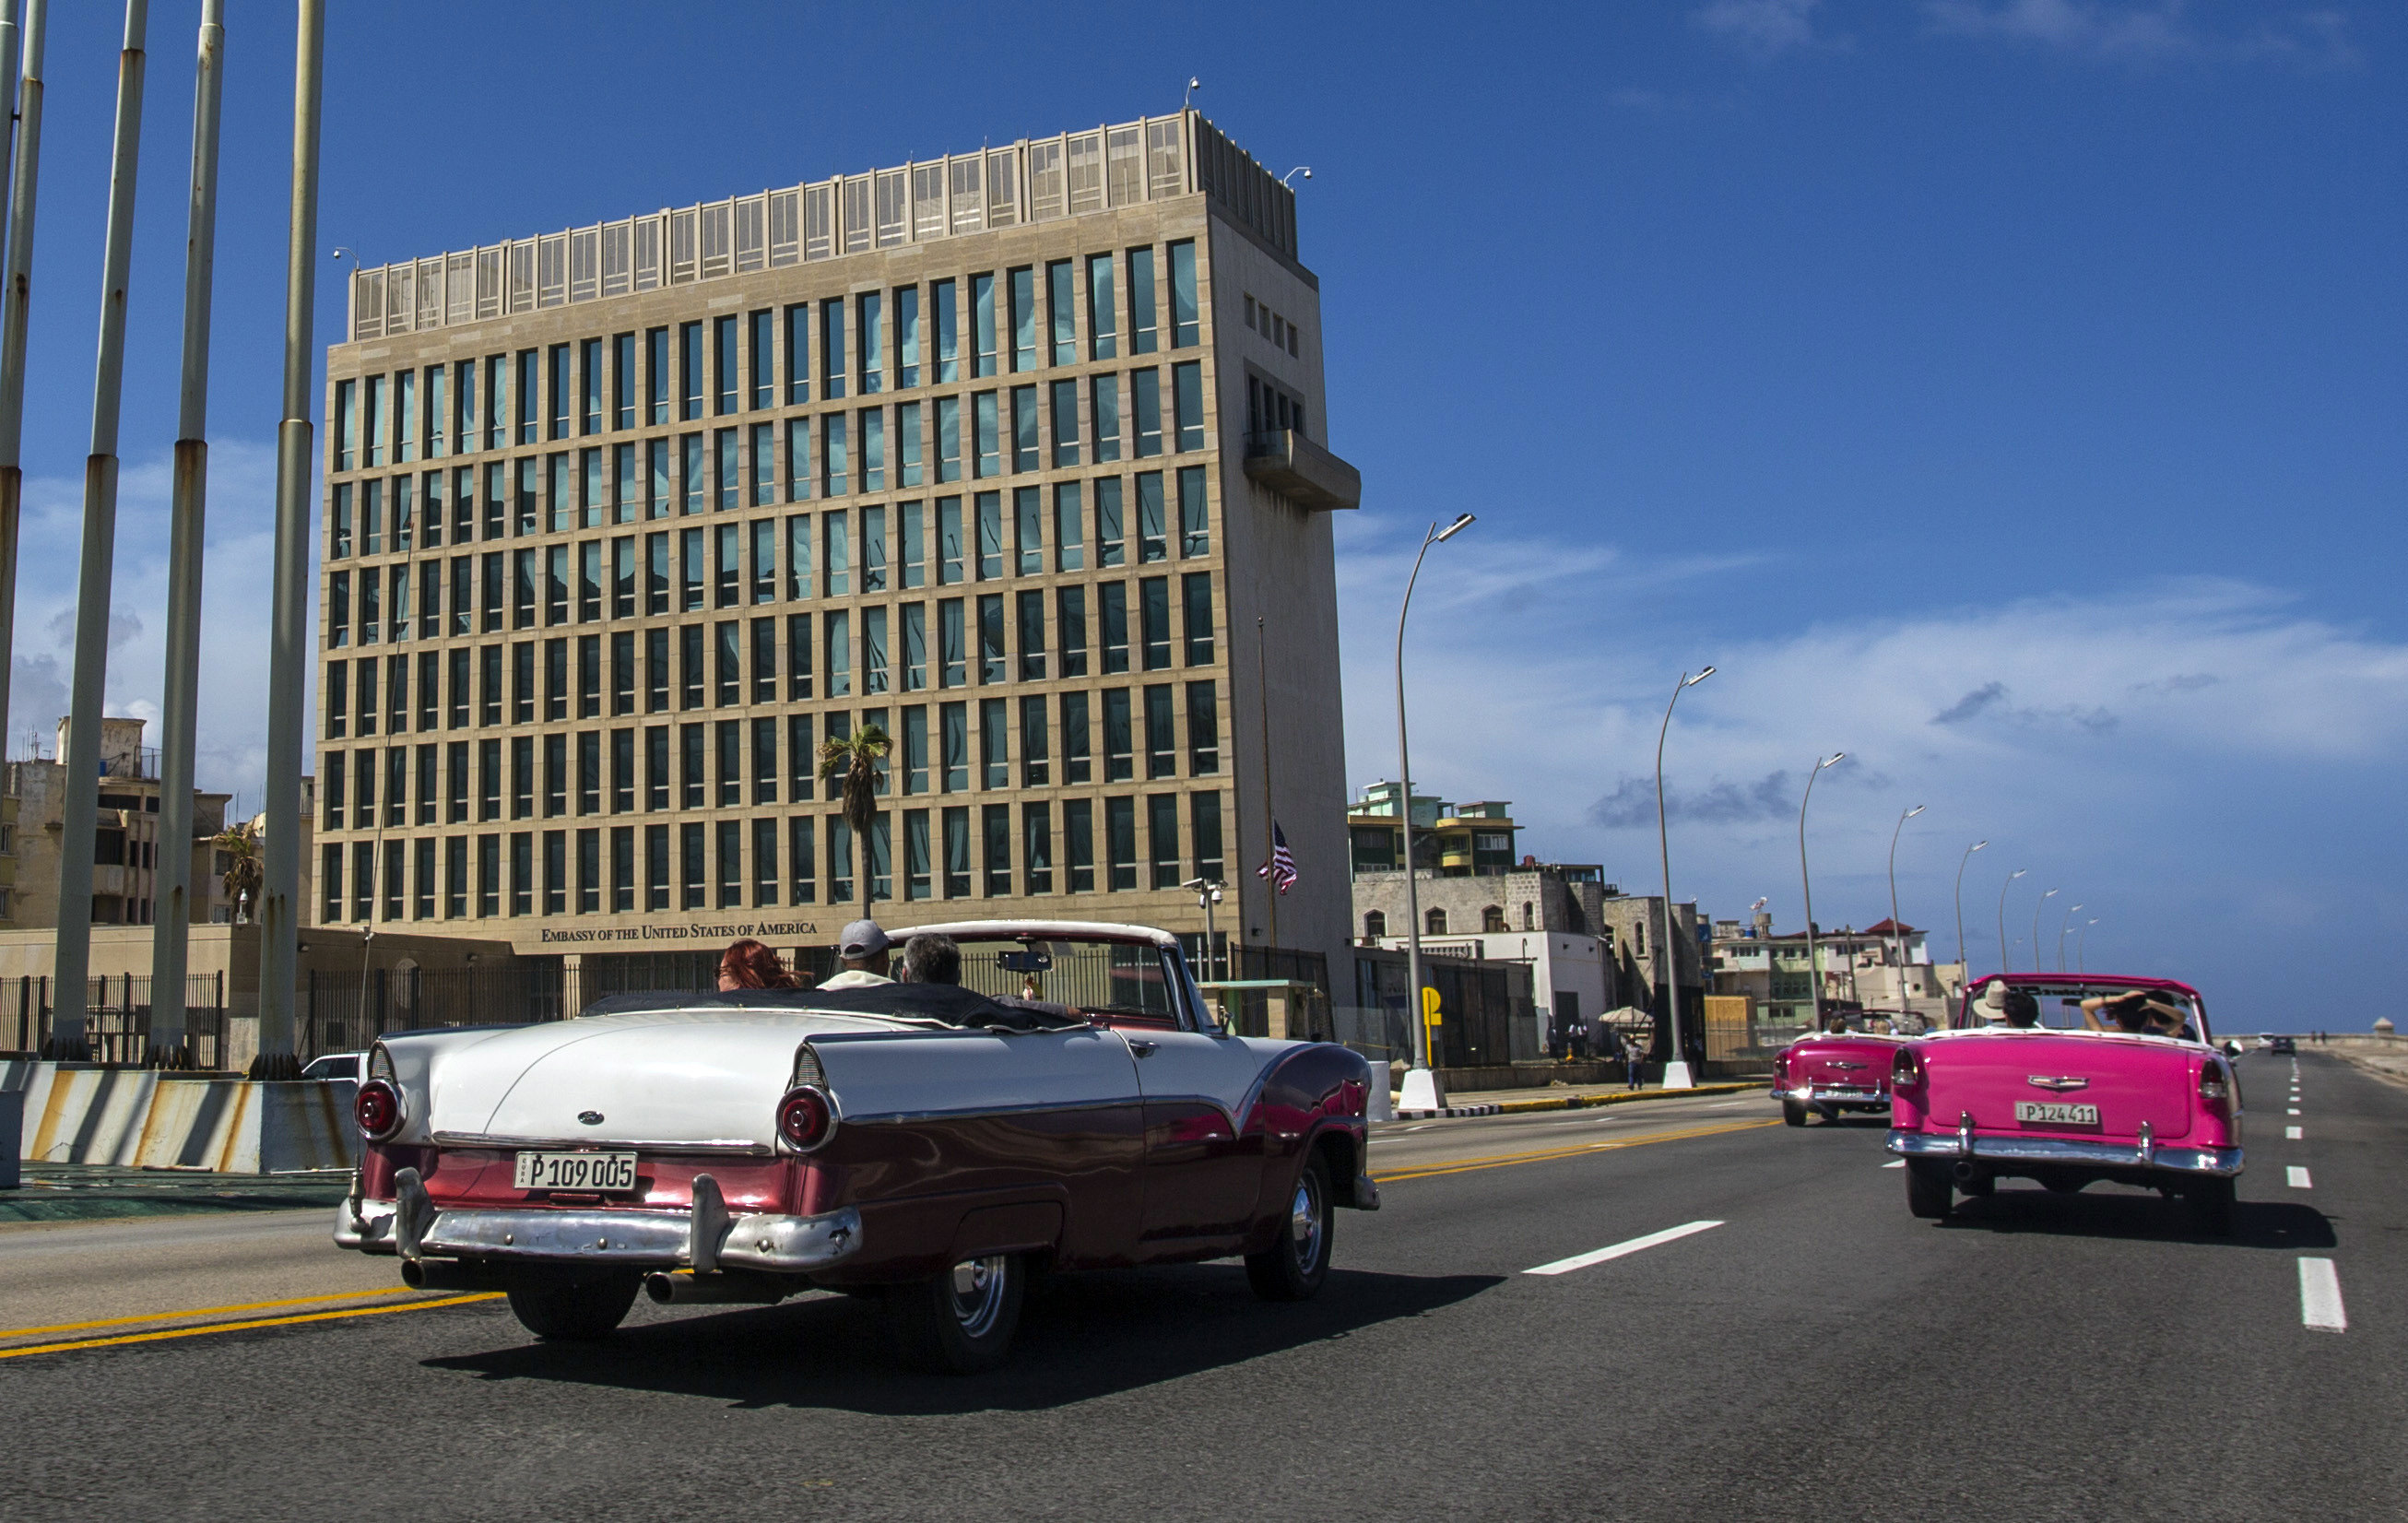 Tourists ride in classic convertibles on the Malecon beside the US embassy in Havana in October 2017. Photo: AP